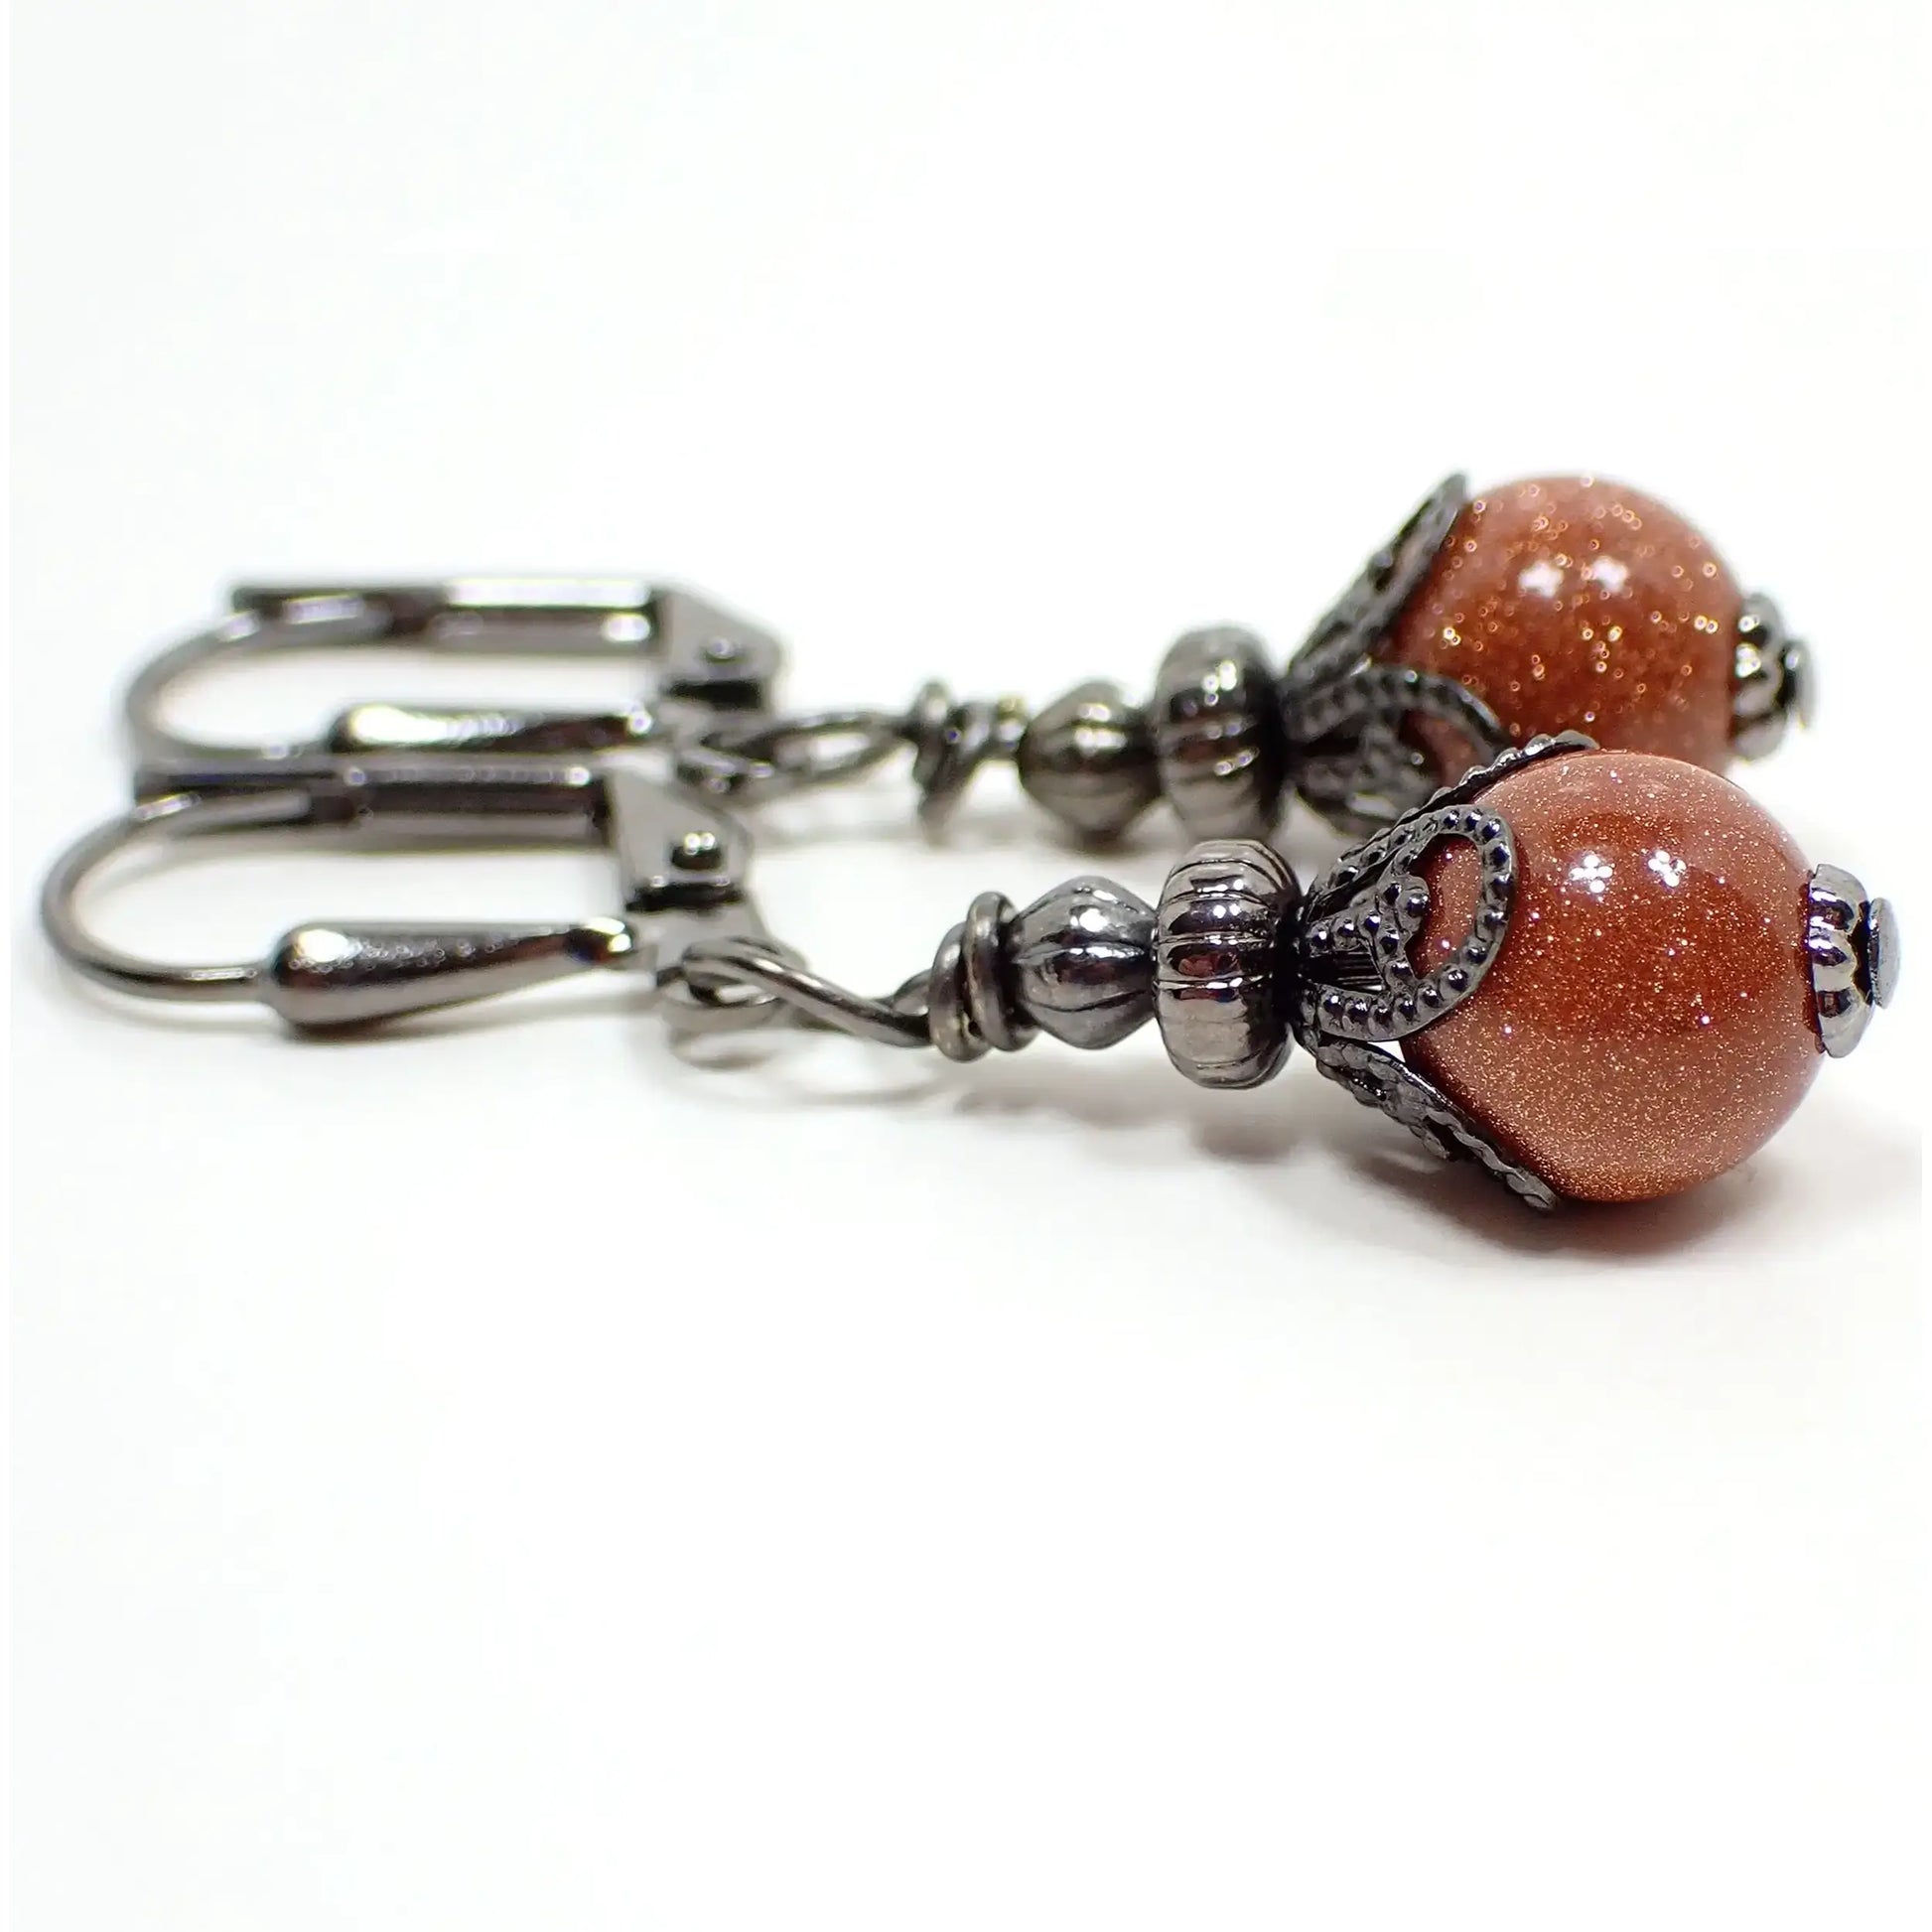 Side view of the handmade goldstone drop earrings. They have gunmetal gray color beads and findings. There are small round ball goldstone beads at the bottom. The goldstone beads are orange glass with tiny flecks of copper for sparkle.